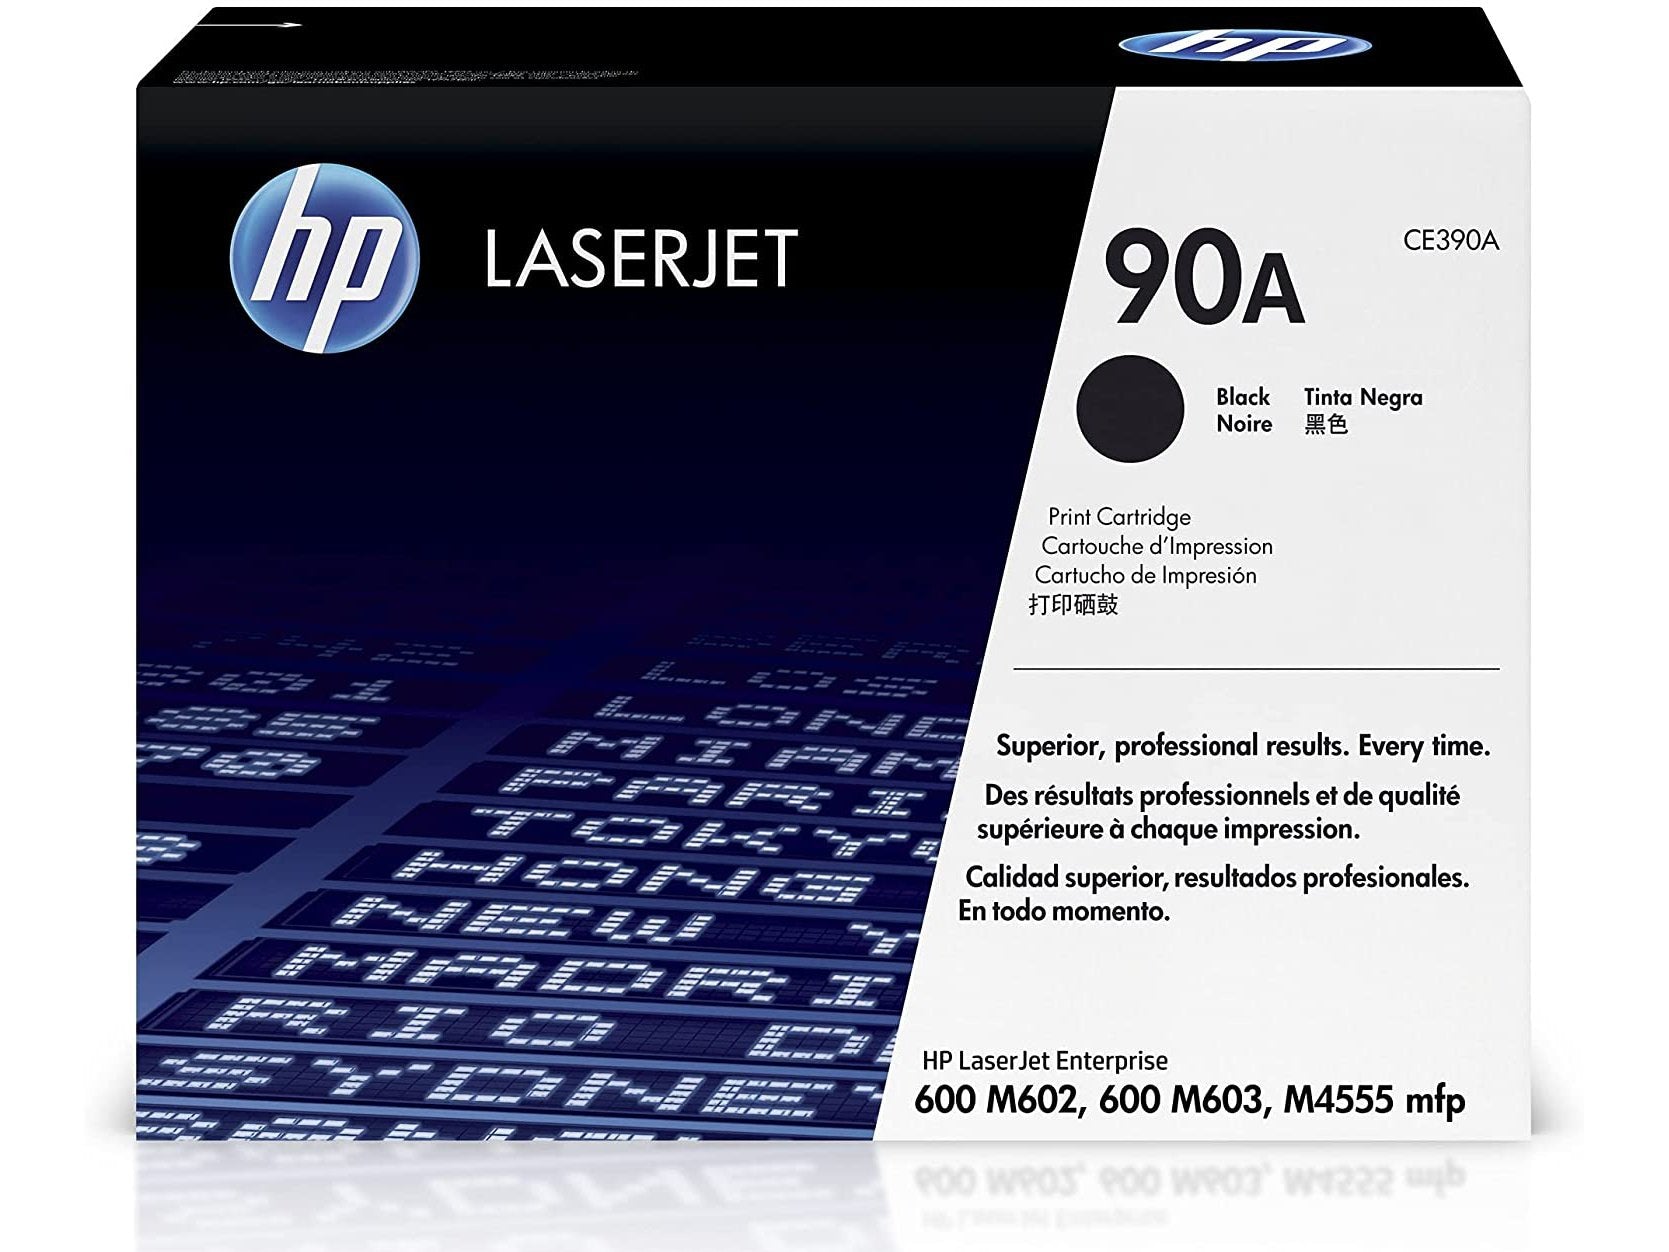 ICU Compatible/ OEM Get HP ICUCE390A Yields 10000 Pages 90A Black Laser Toner Cartridge - Ink Cartridges USA